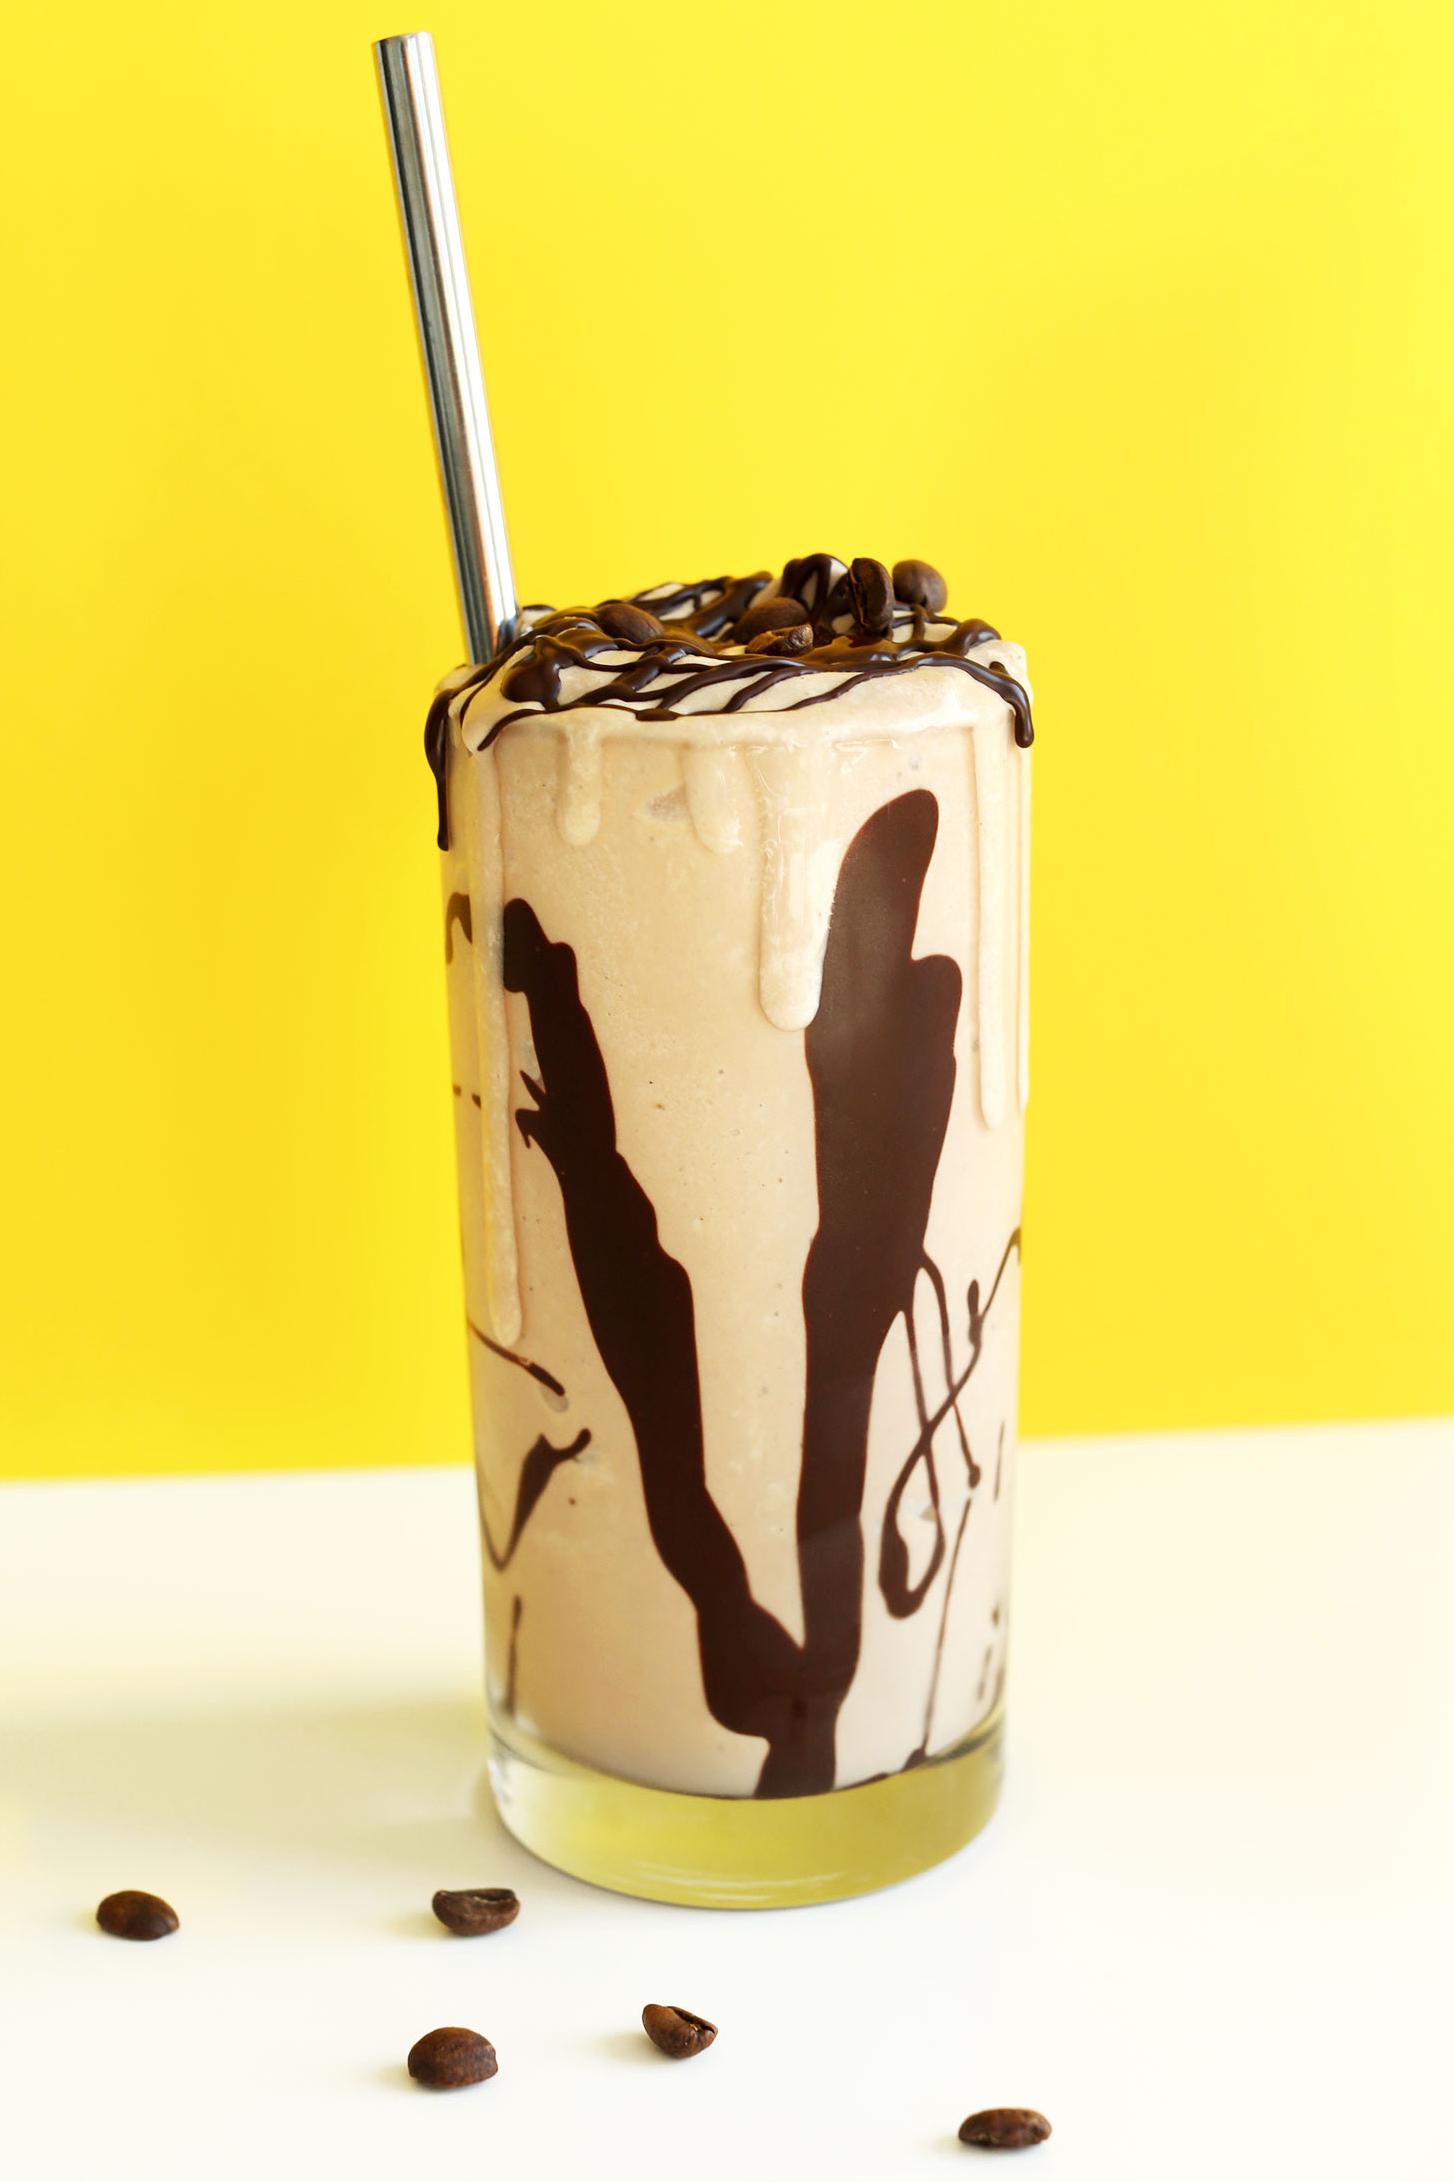  Looking for a caffeine kick? Try our mocha milkshake for an extra boost!